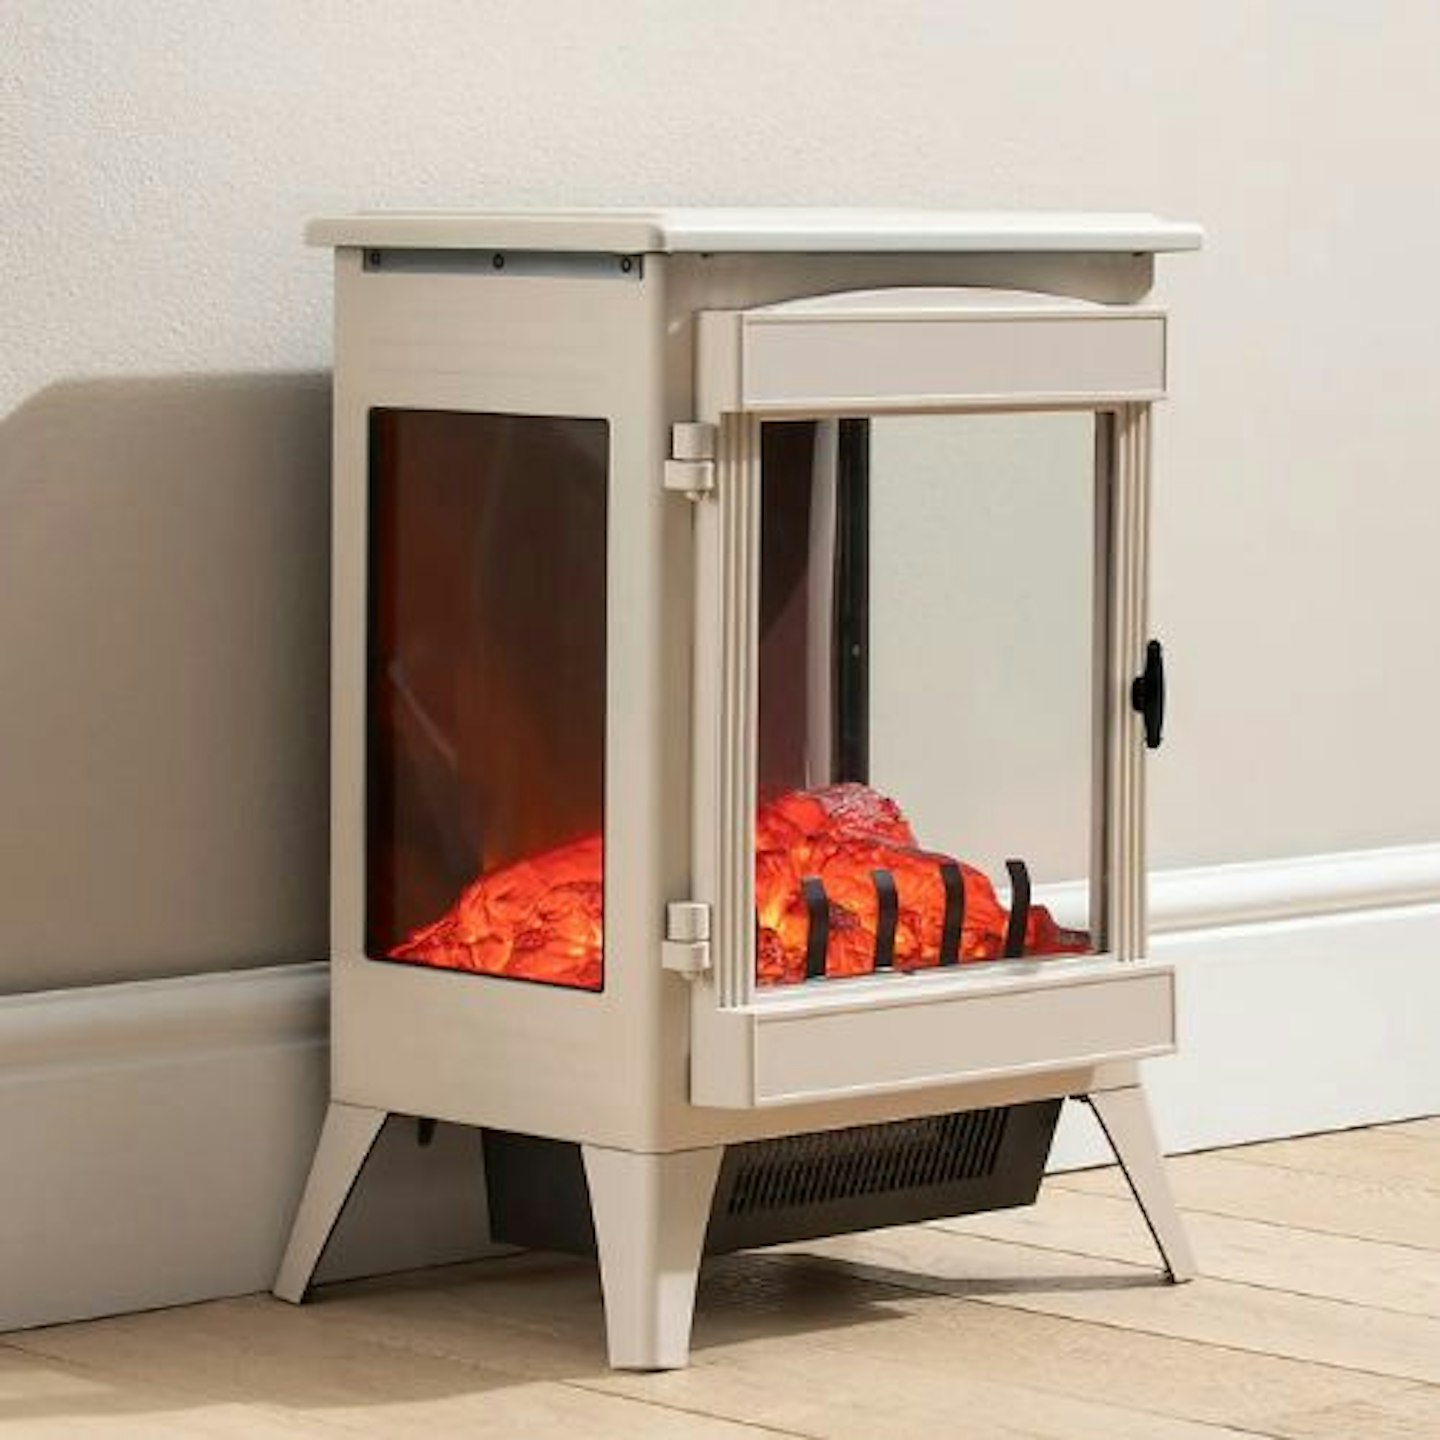 Three Sided Glass Contemporary Stove